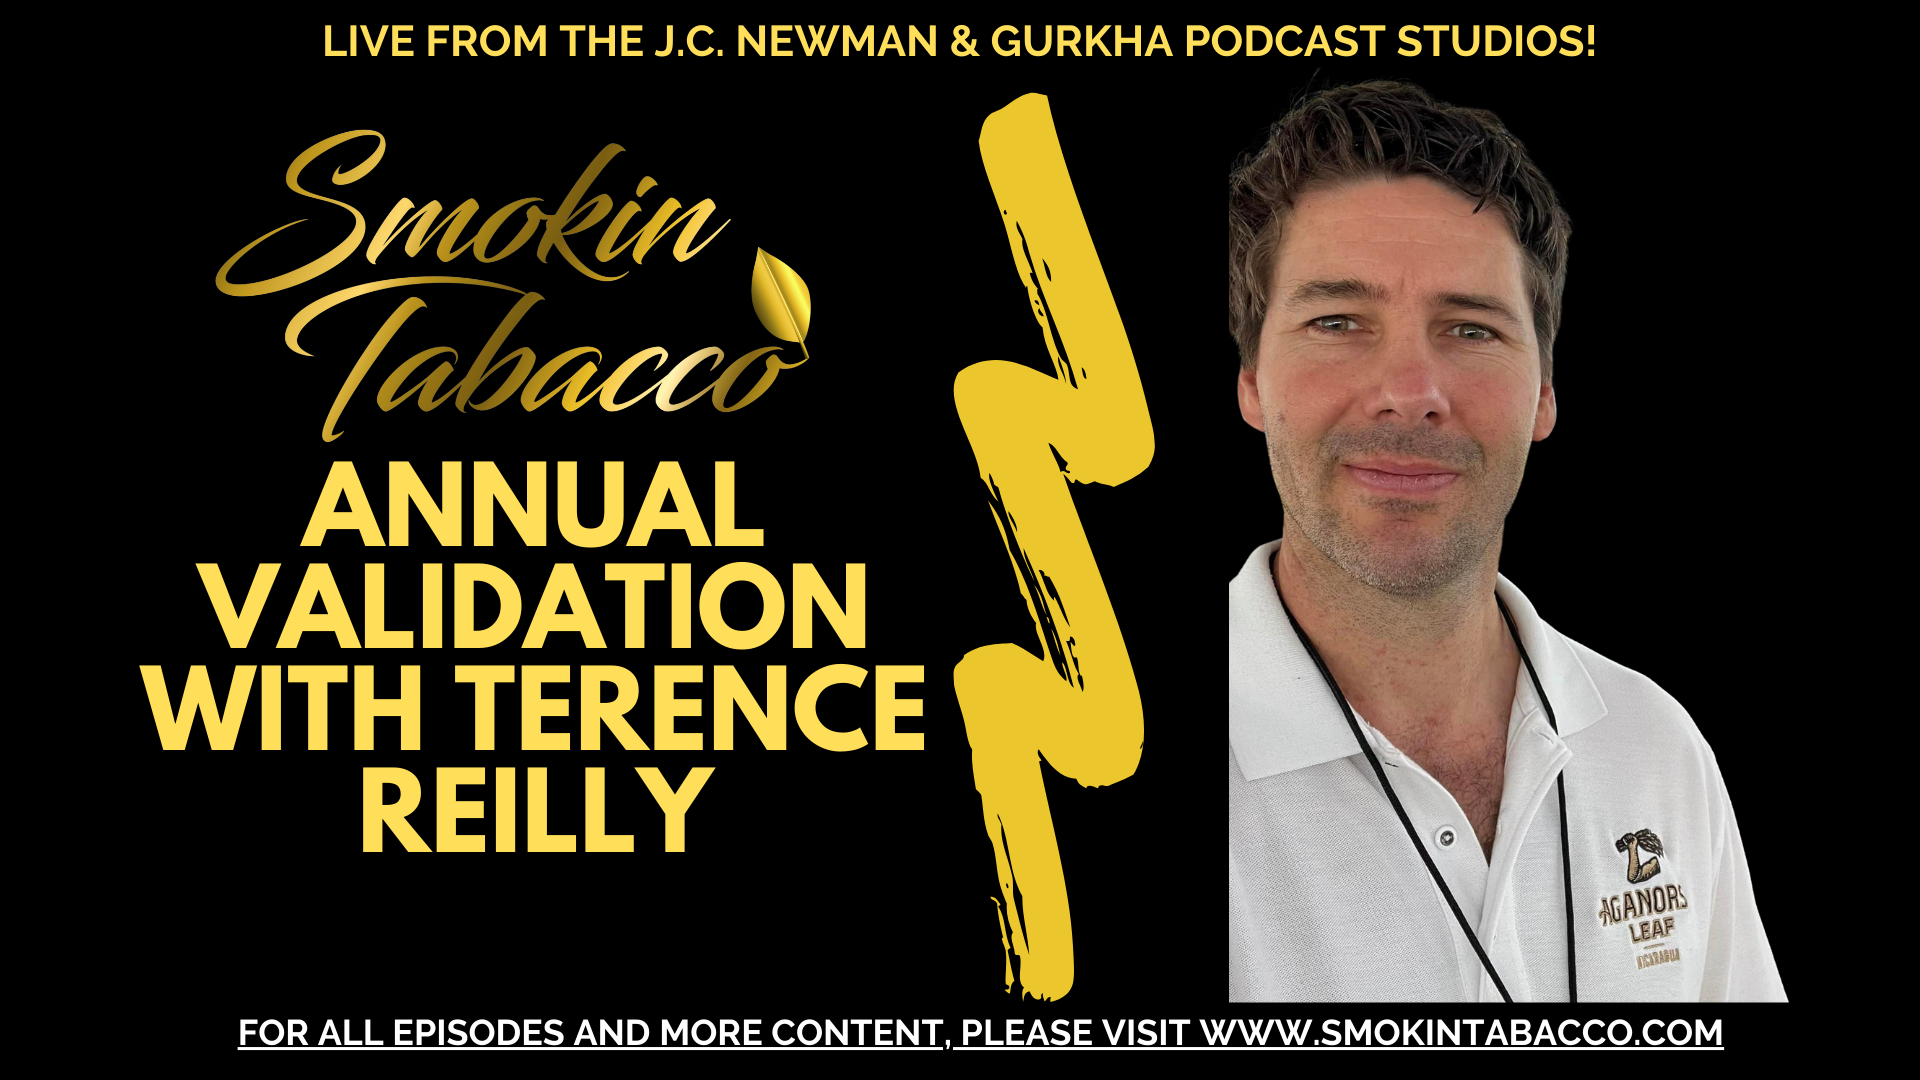 Smokin Tabacco Youtube Annual Validation with Terence Reilly Poster